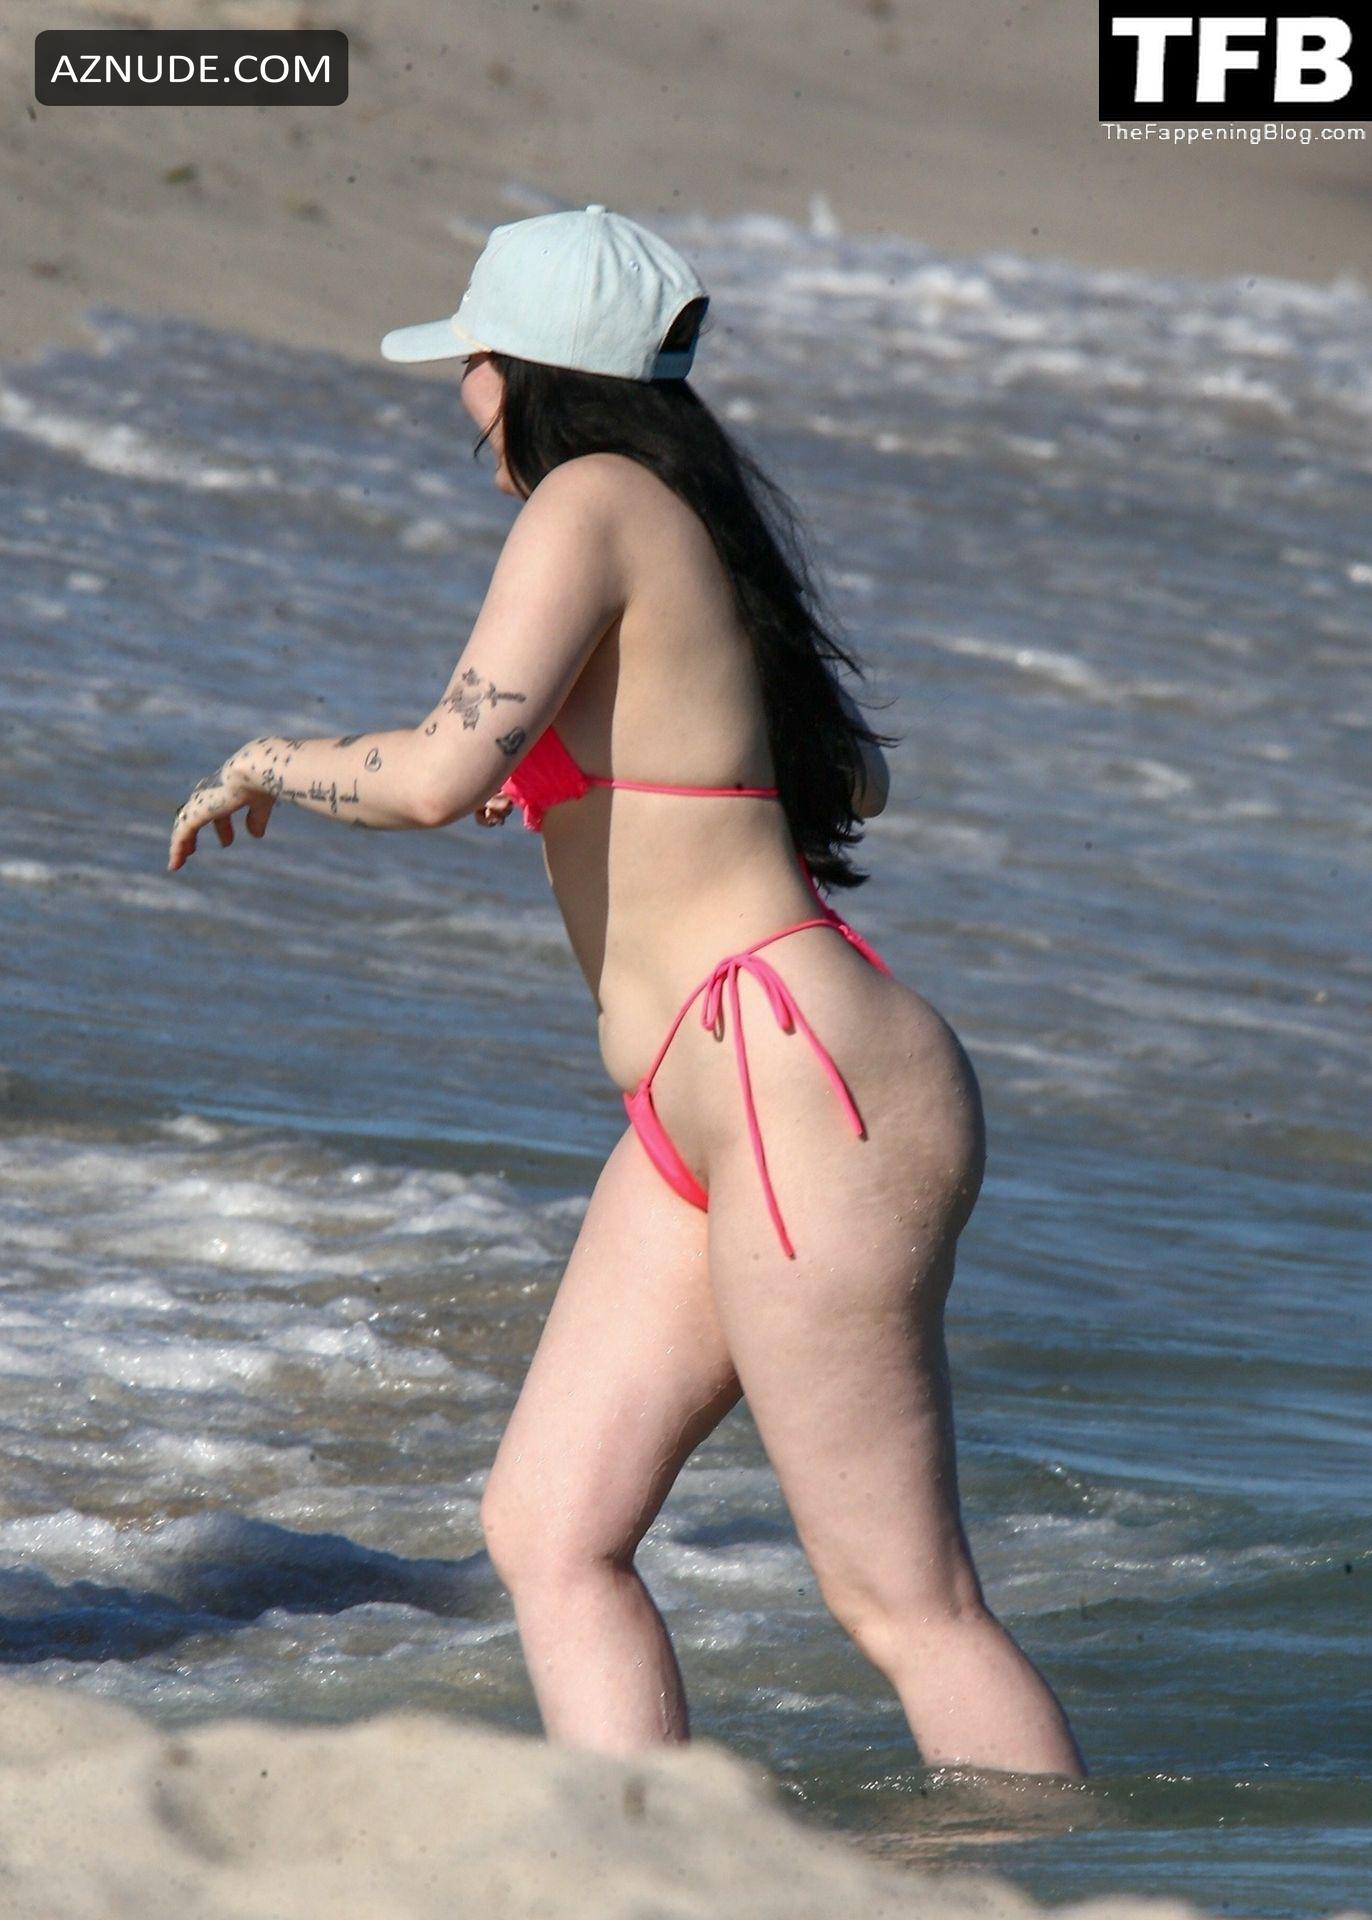 Noah Cyrus Sexy Seen Flaunting Her Hot Tits And Ass In A Bikini At The Beach  in Miami - AZNude